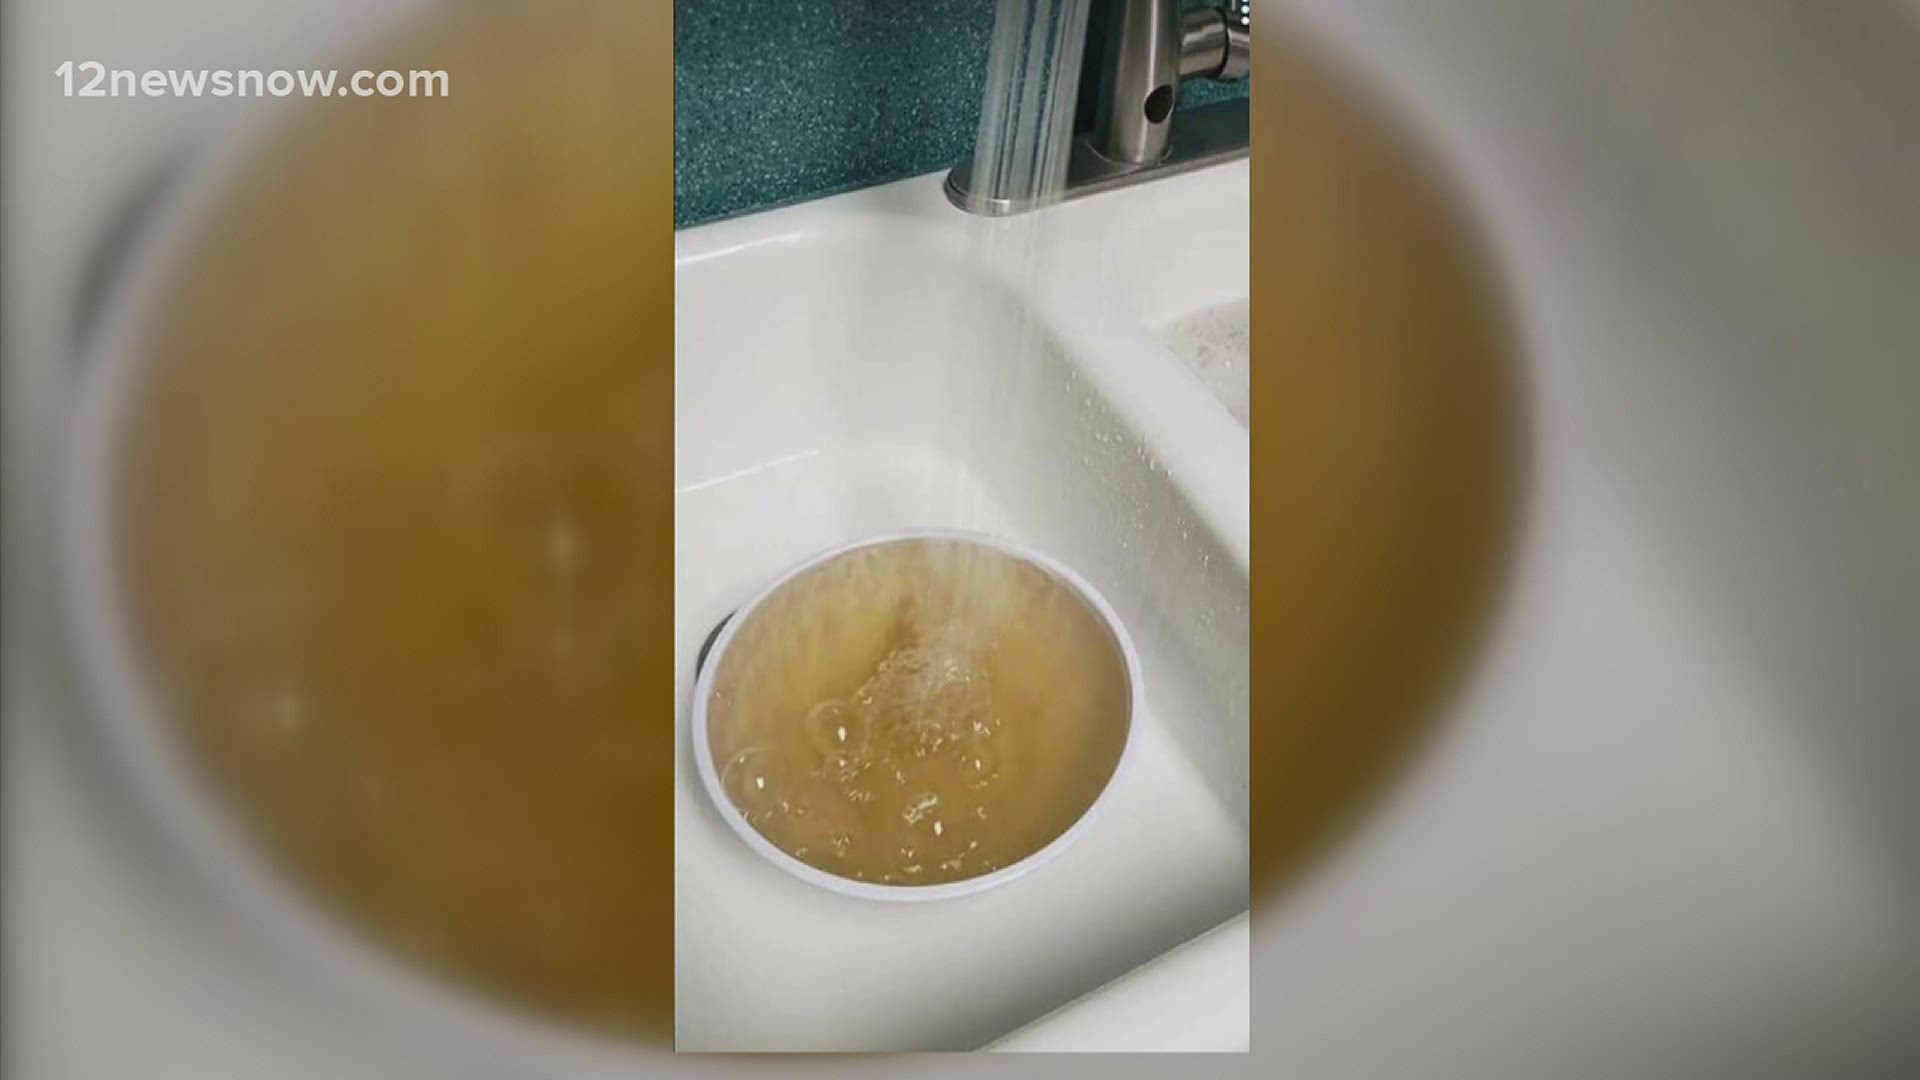 Following a high number of calls about discolored water in the past couple of weeks, Beaumont City Council is bringing those concerns to the forefront.